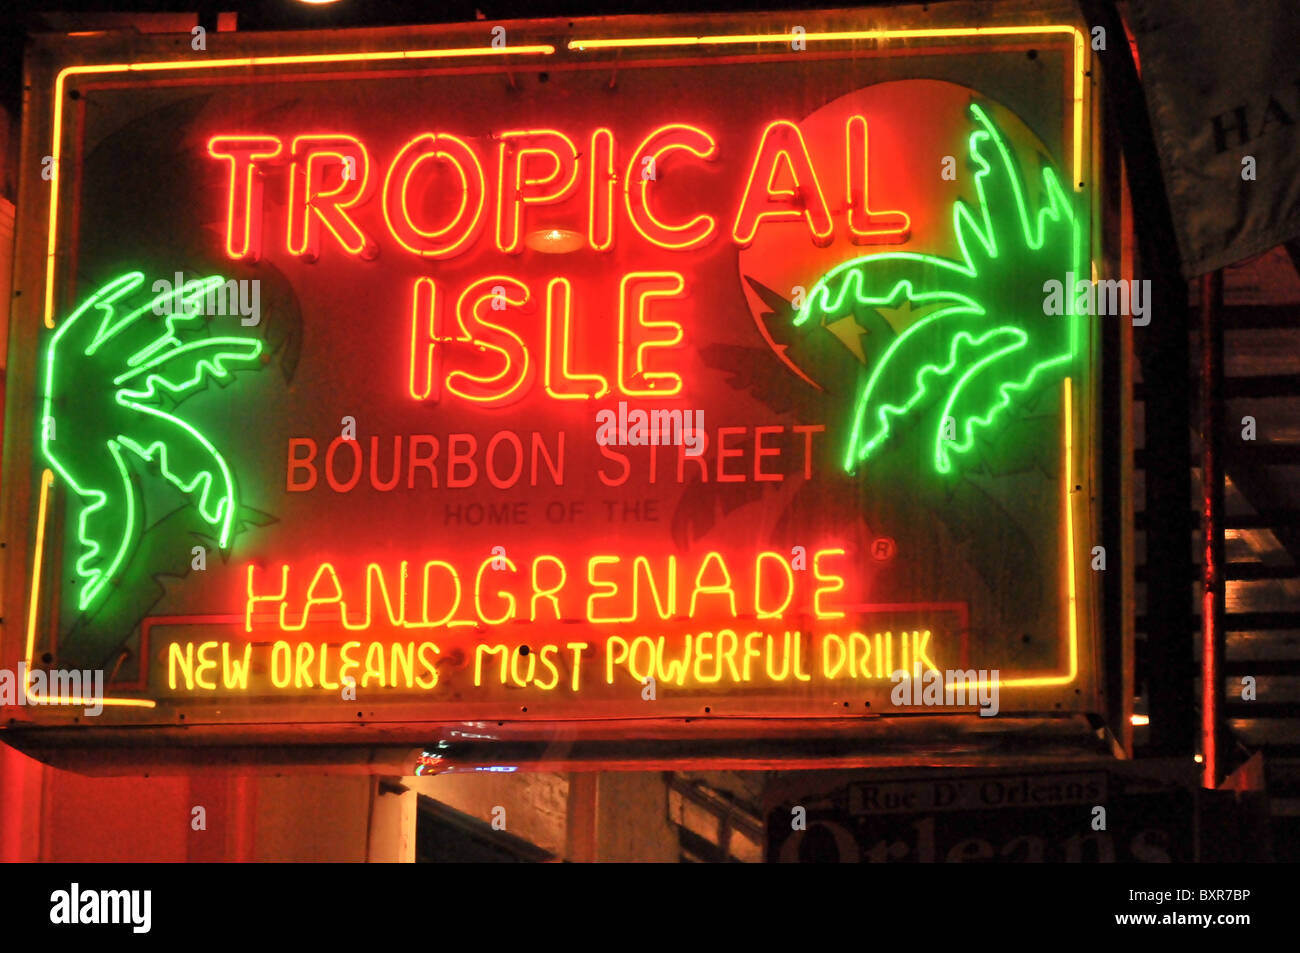 Tropical Isle Hand Grenade neon sign on Bourbon Street, French Quarter, New Orleans, Louisiana Stock Photo